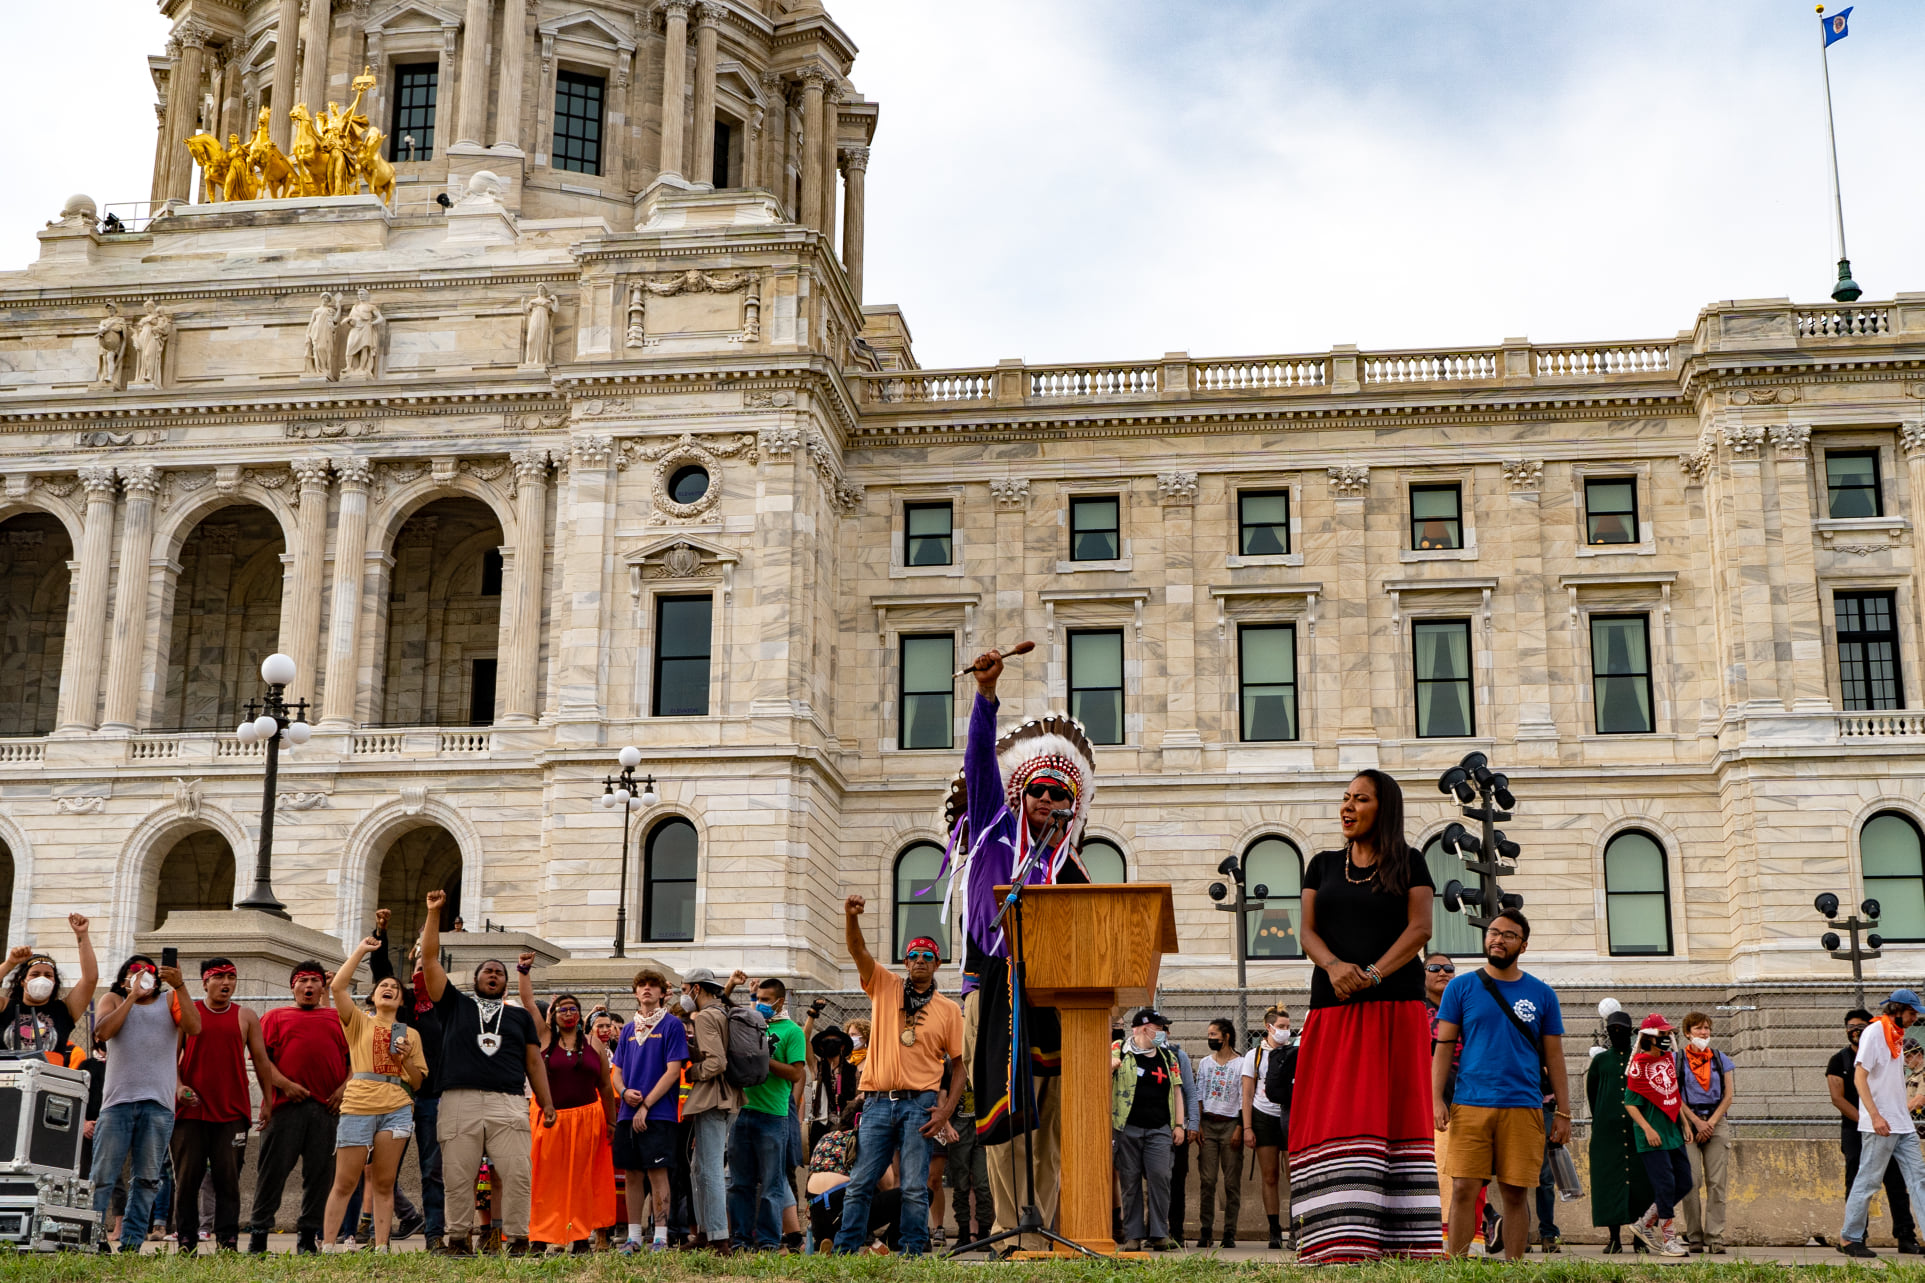 Potter Trial Continues; Minnesotans Want More Education on Native Americans